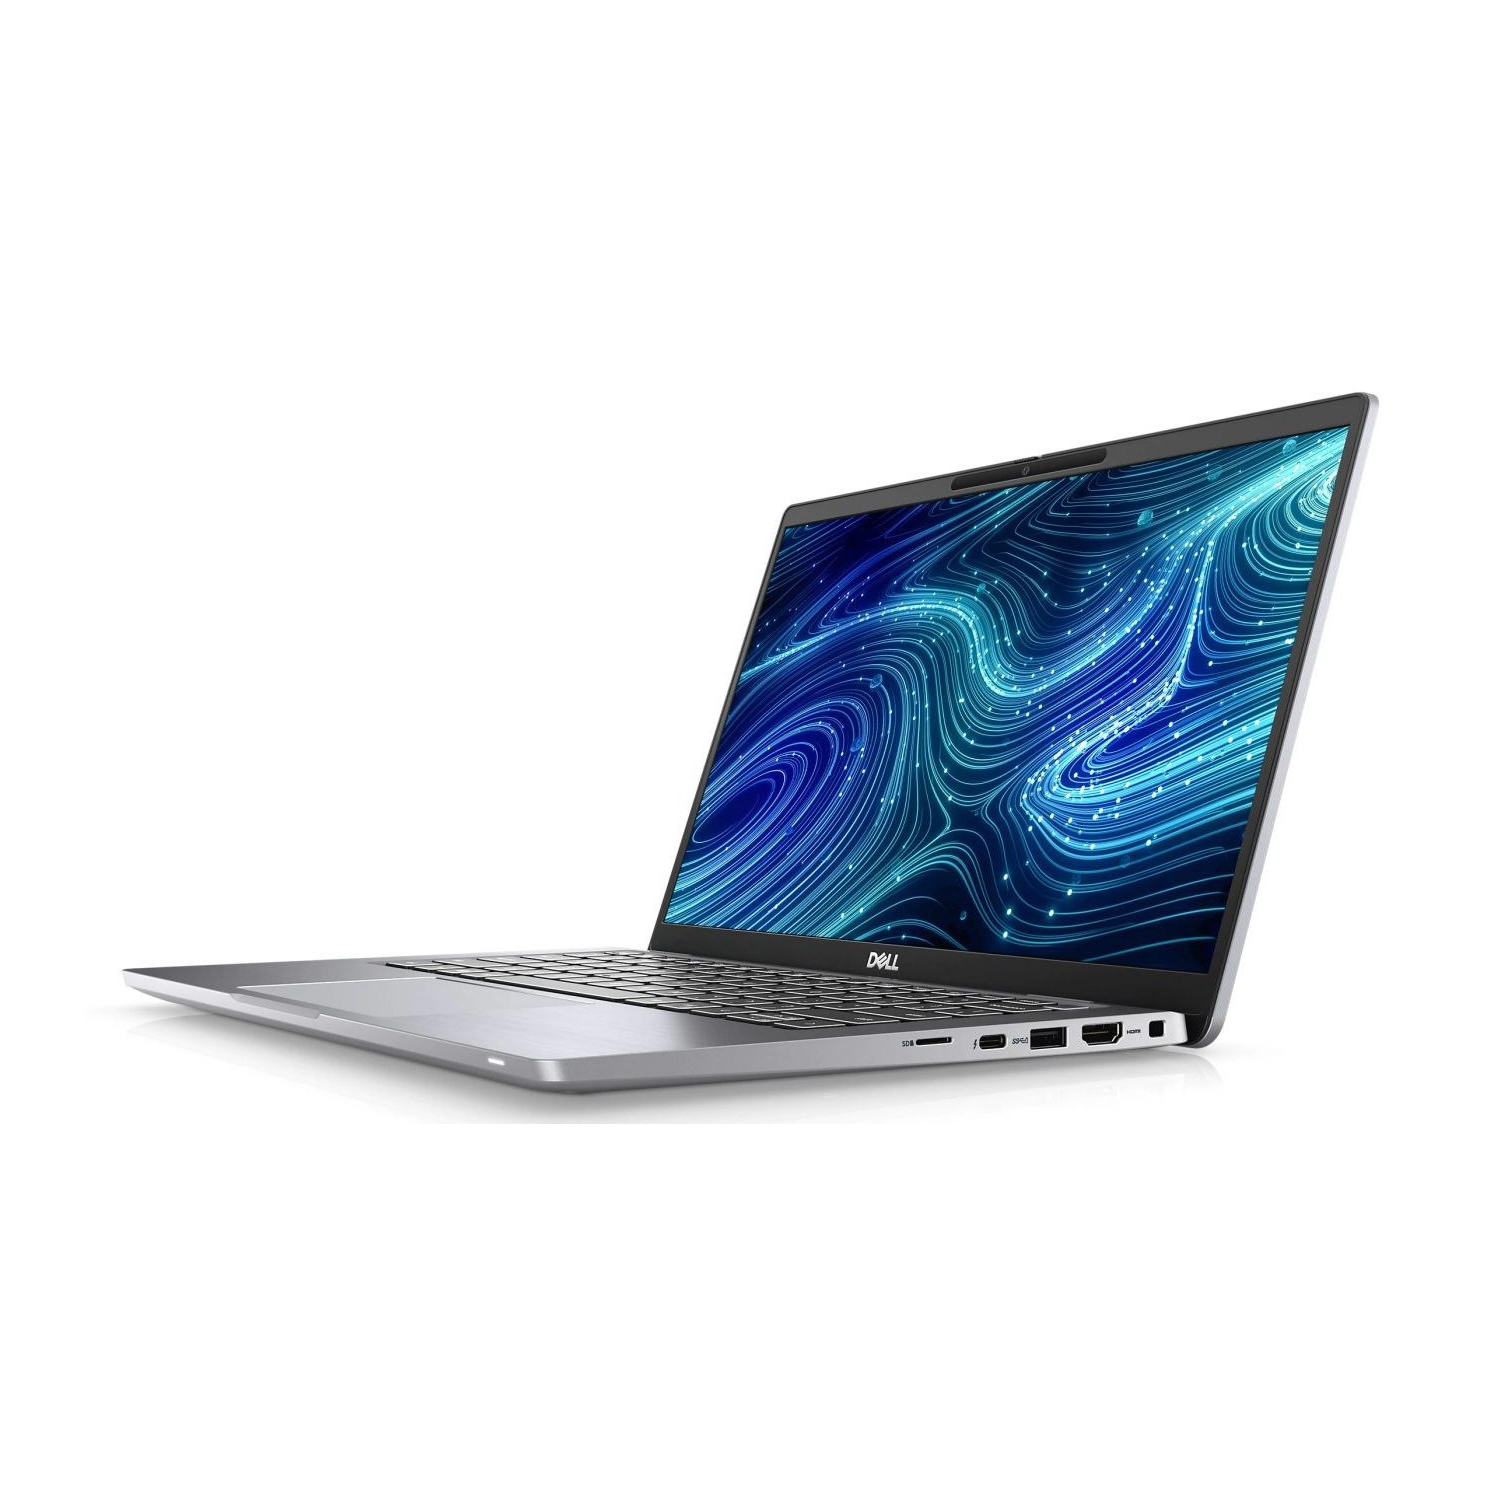 Refurbished (Excellent) - Dell Latitude 7000 7420 Laptop (2021) | 14" FHD | Core i7 - 512GB SSD - 16GB RAM | 4 Cores @ 4.4 GHz - 11th Gen CPU Certified Refurbished